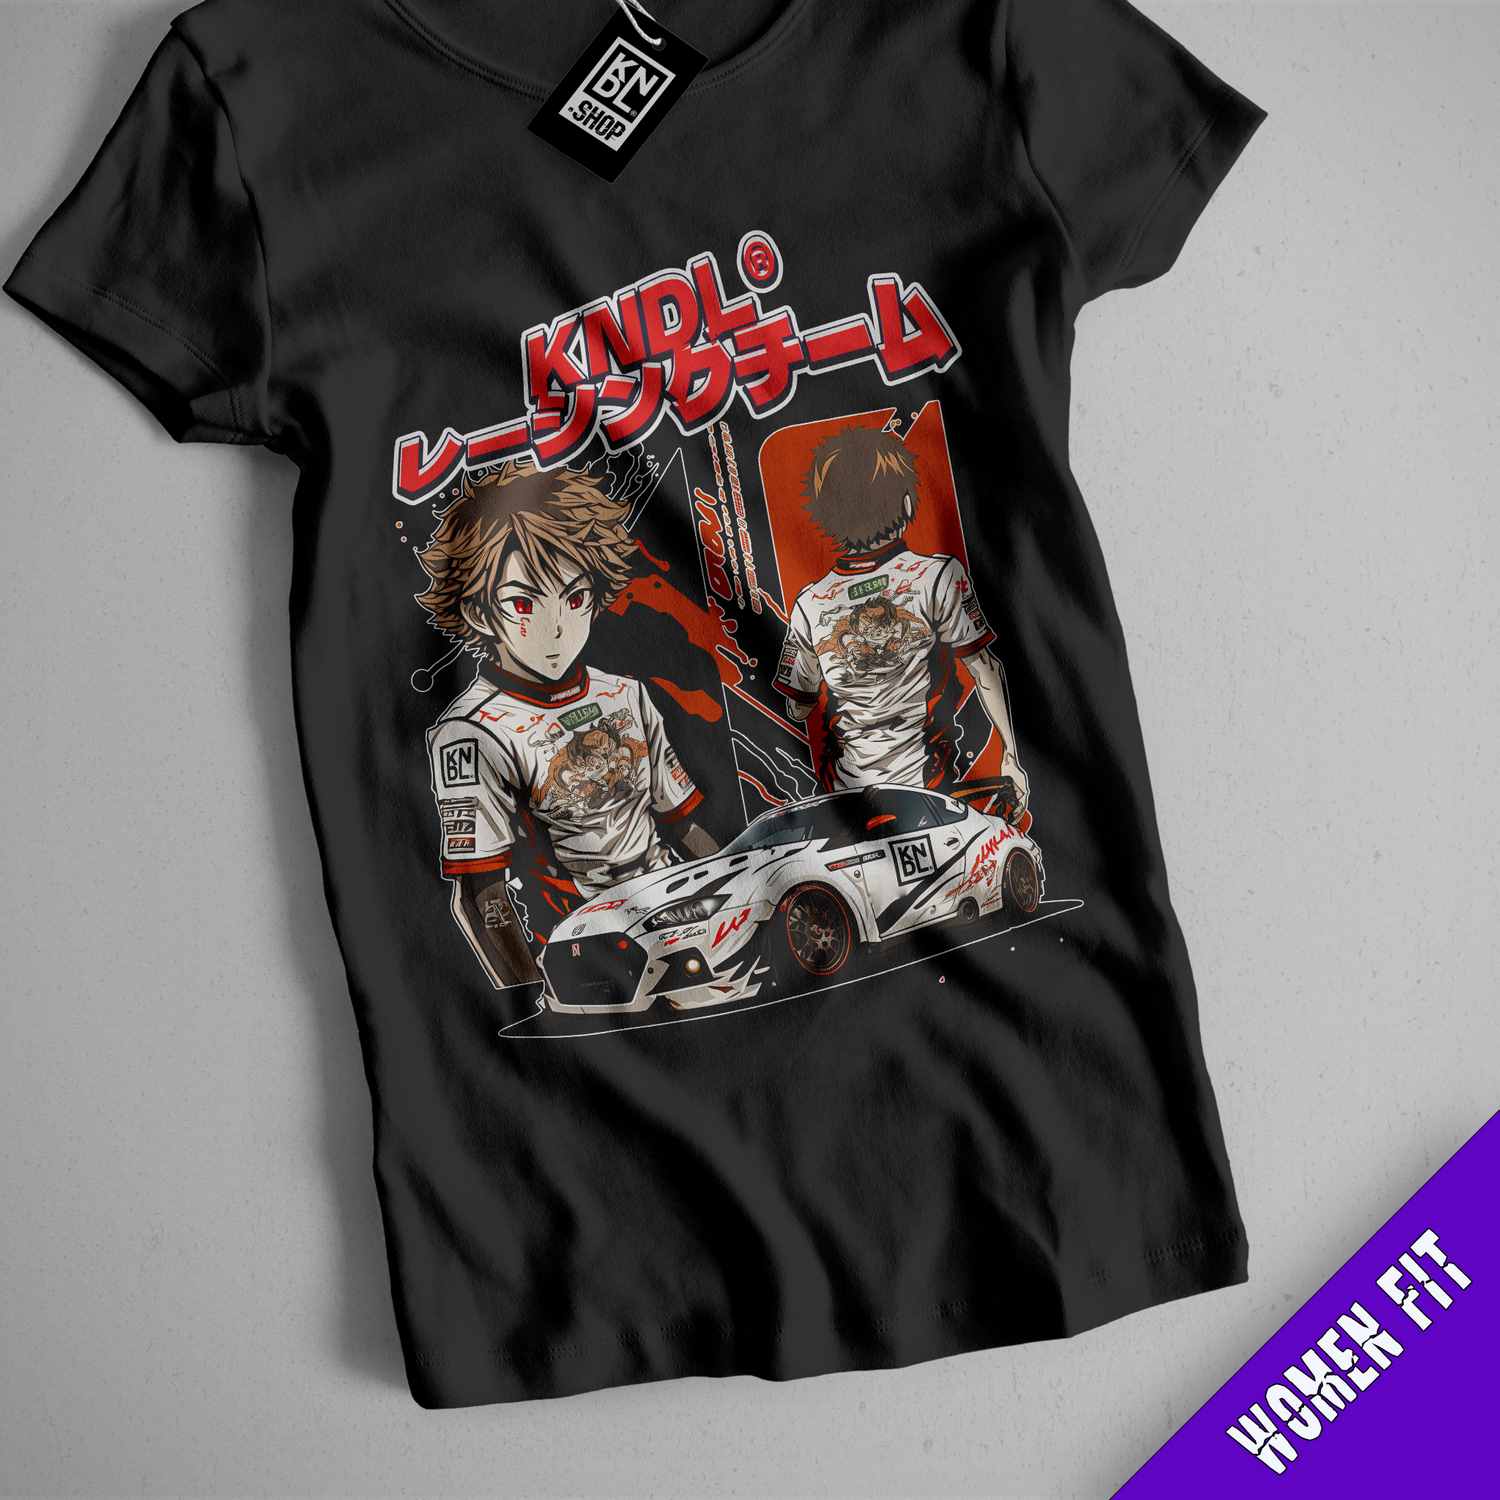 a t - shirt with a picture of two people in a race car